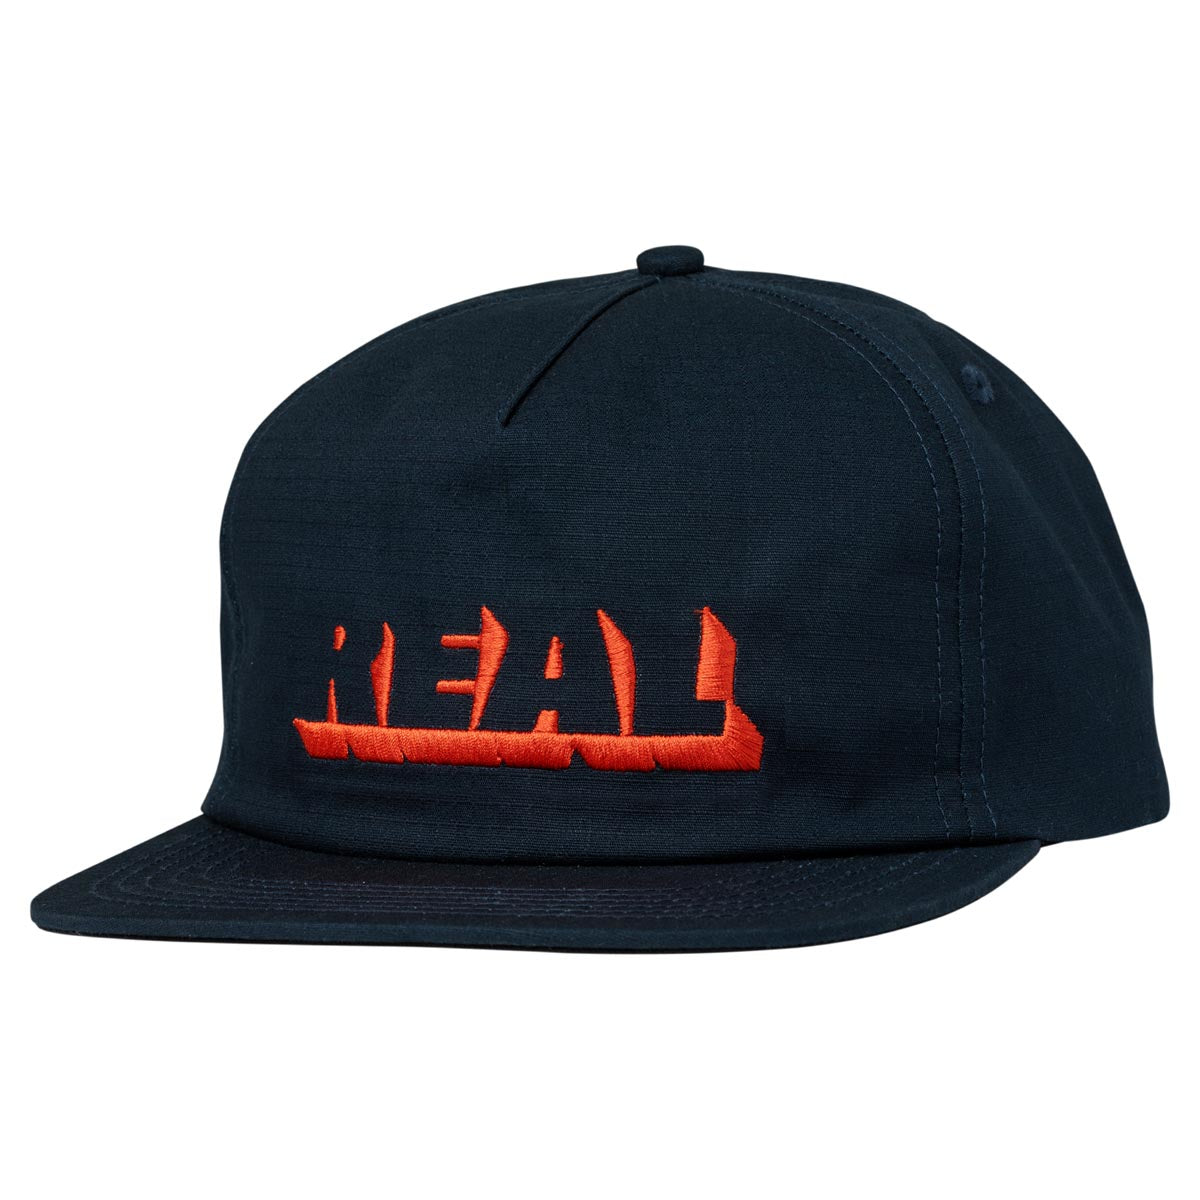 Real Shadow Snapback Hat - Navy/Red image 1